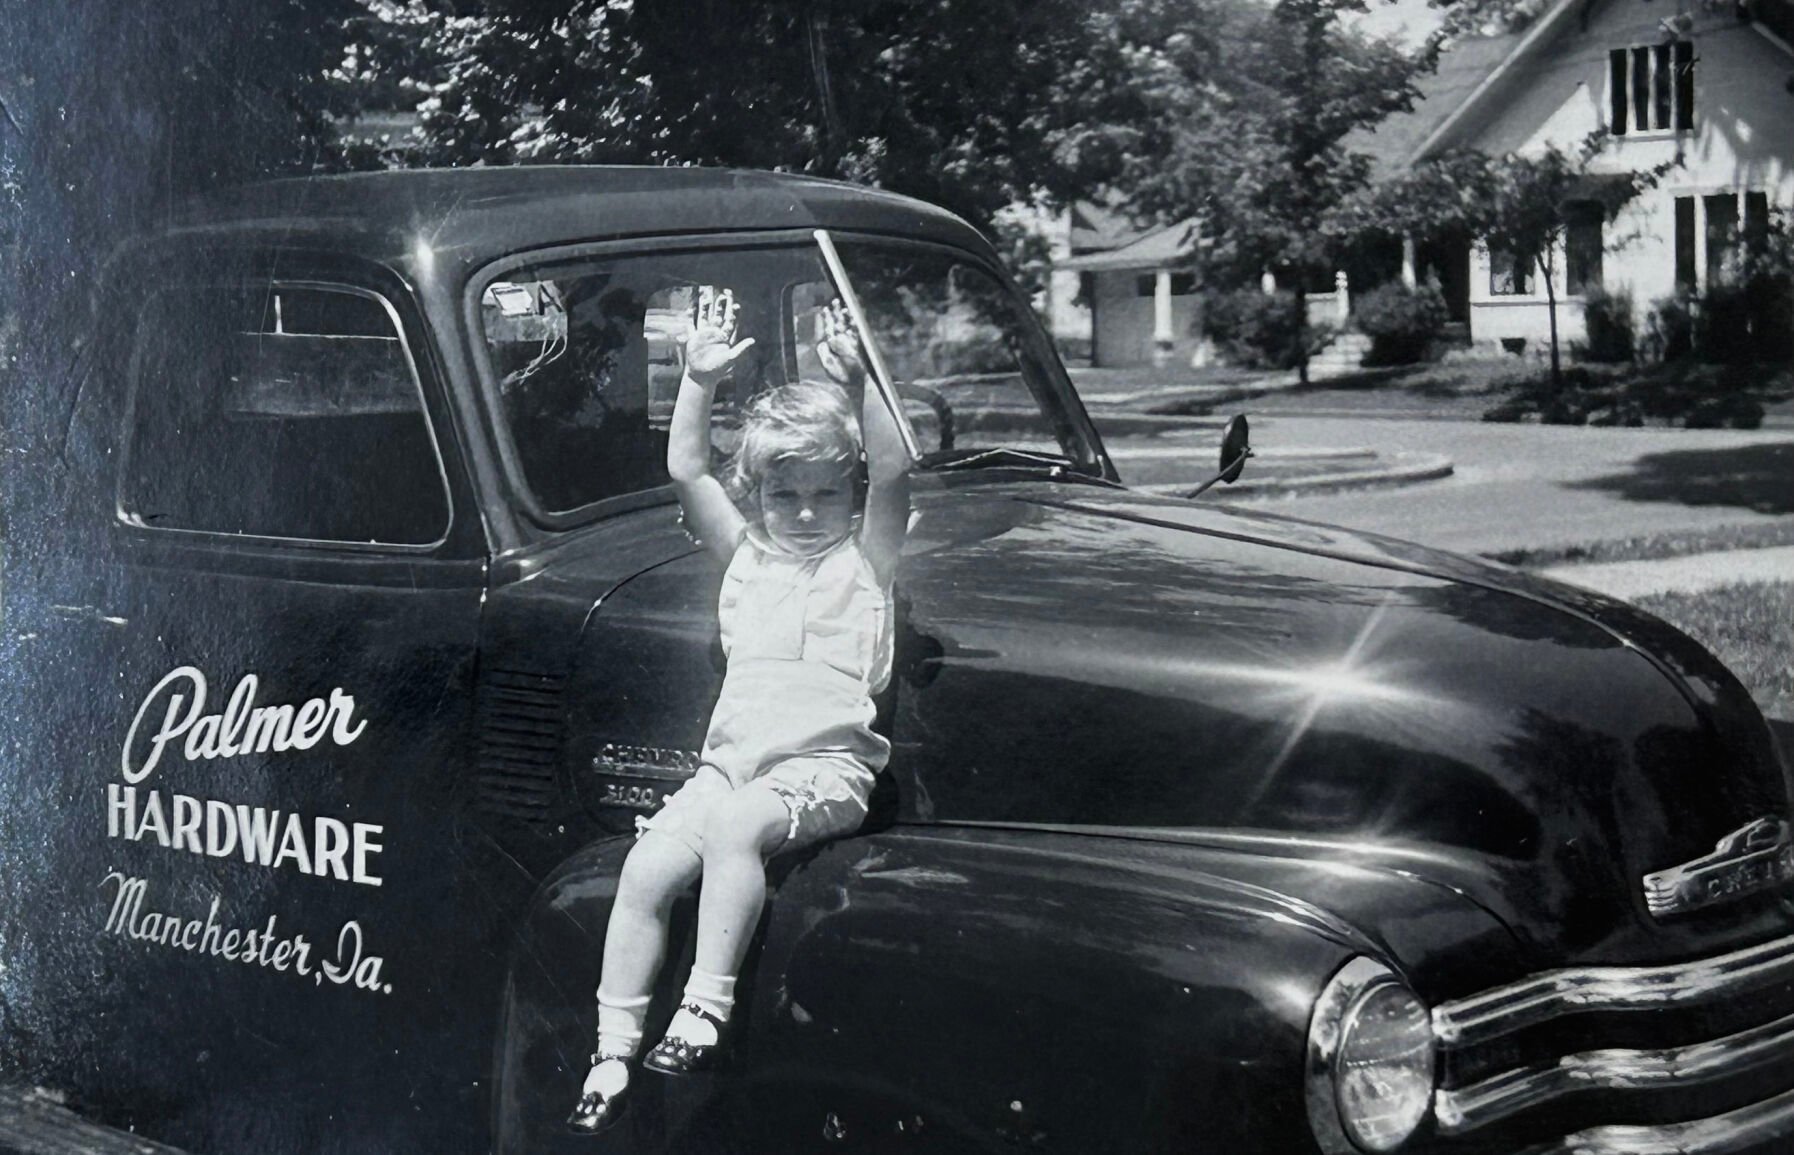 An undated photo shows Ellen (Palmer) Wehrle sitting on the first Palmer Hardware truck.    PHOTO CREDIT: Contributed